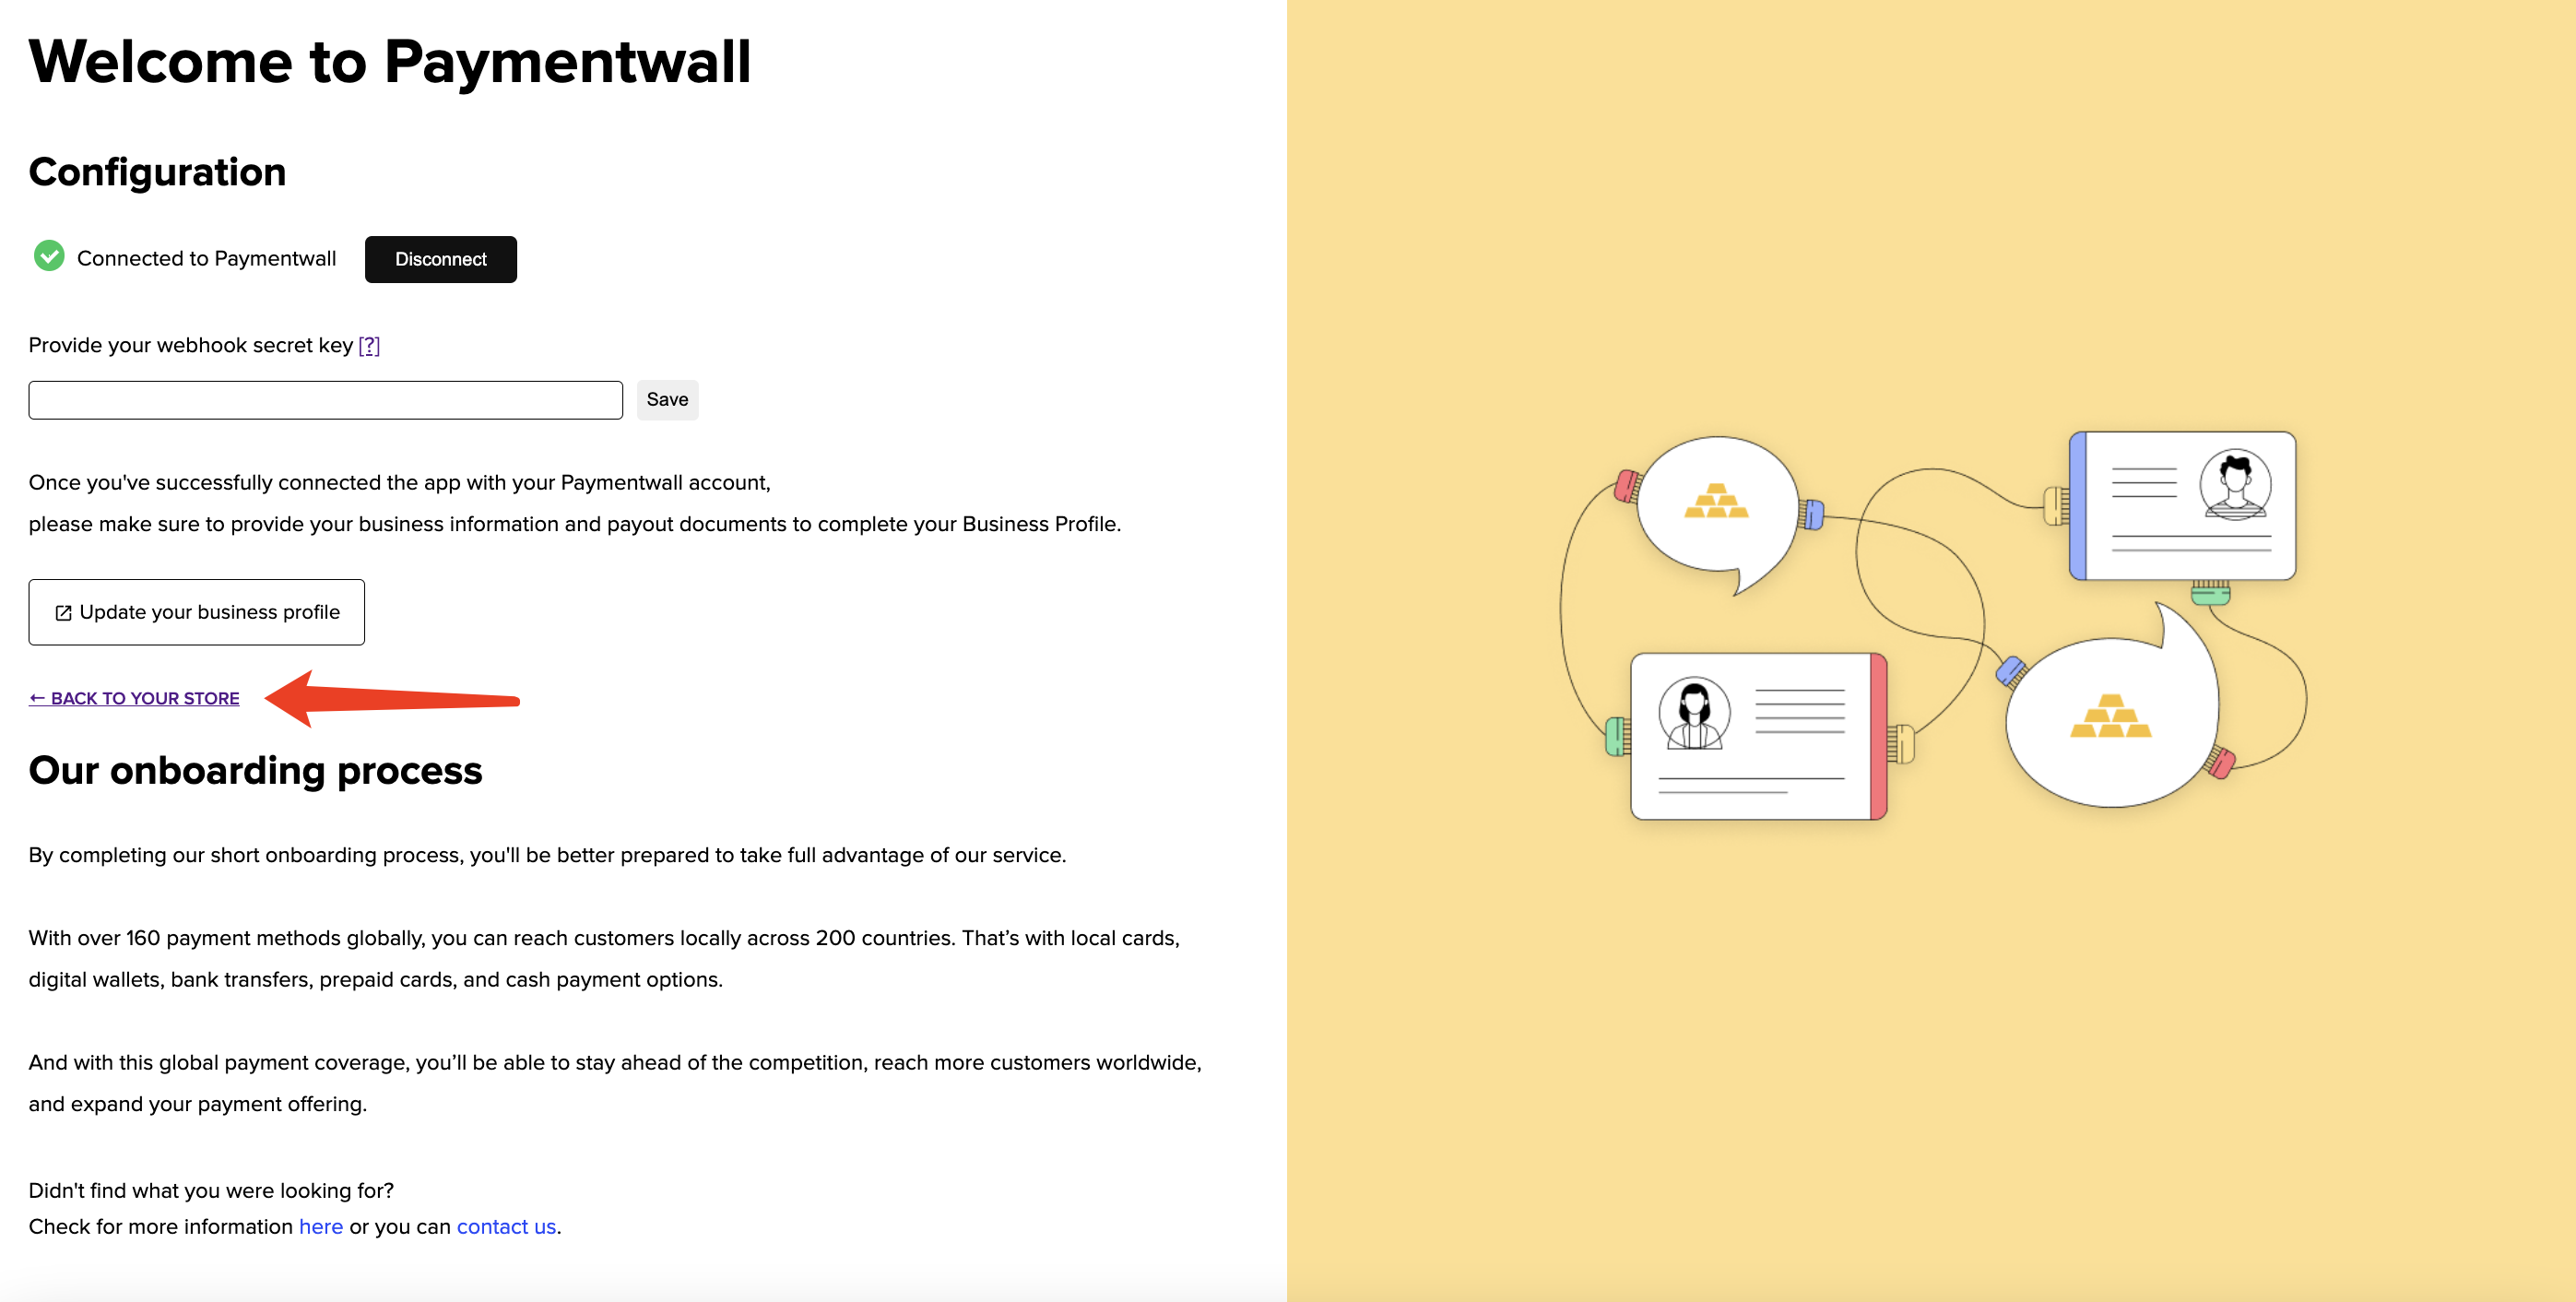 Shopify Paymentwall installation - connected